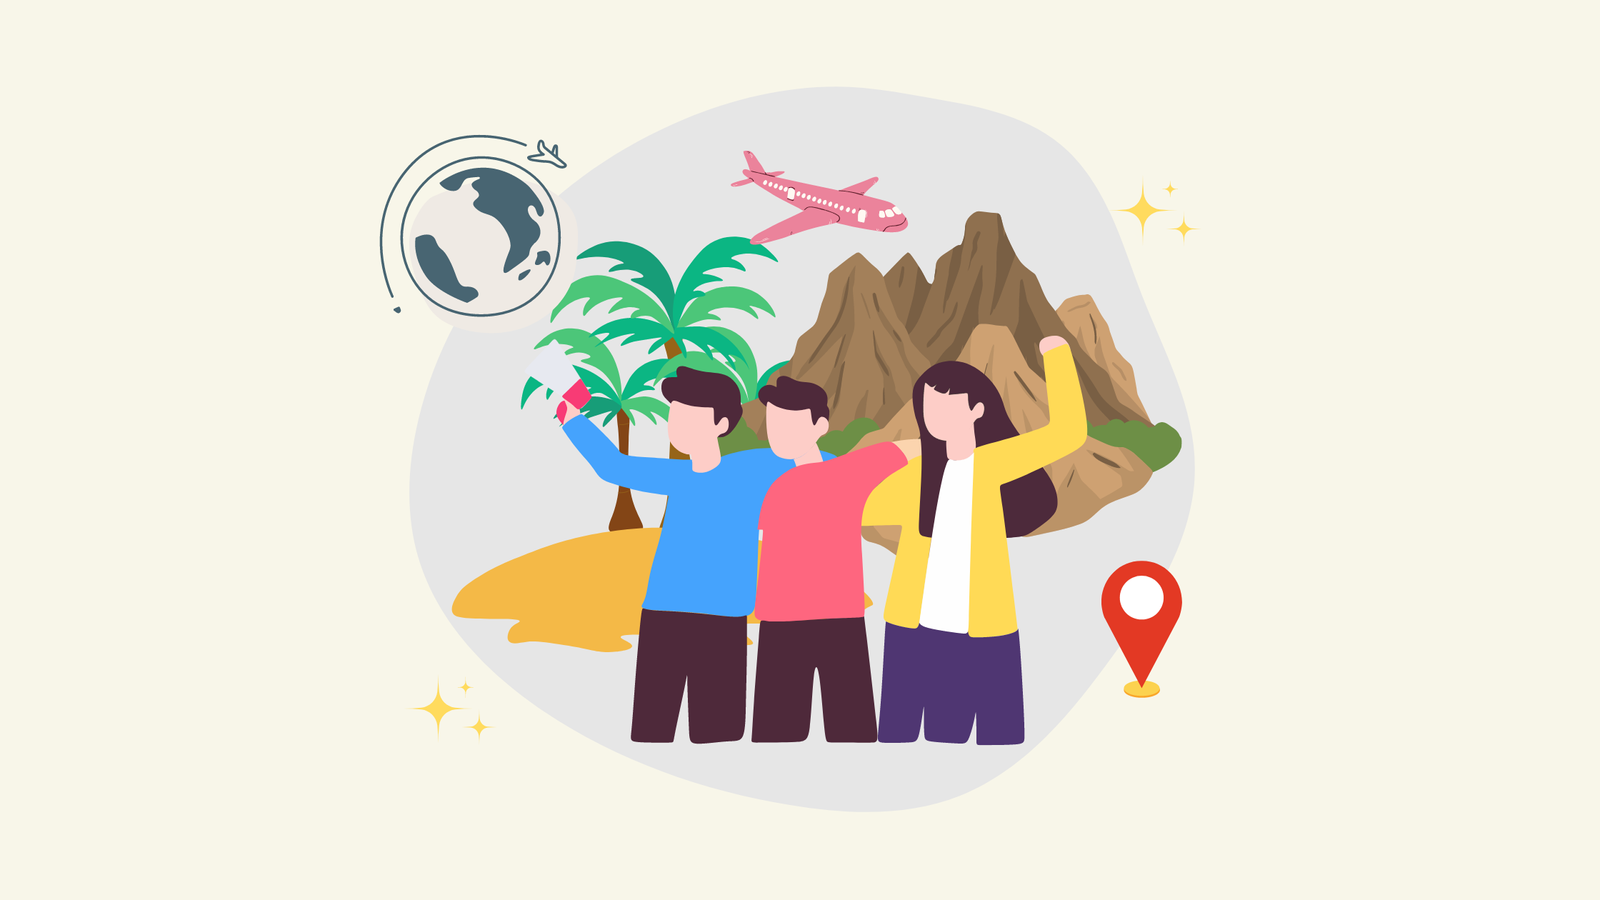 Graphic of 3 people shoulder to shoulder holding each other with mountains, palm trees and an airplane in the background.